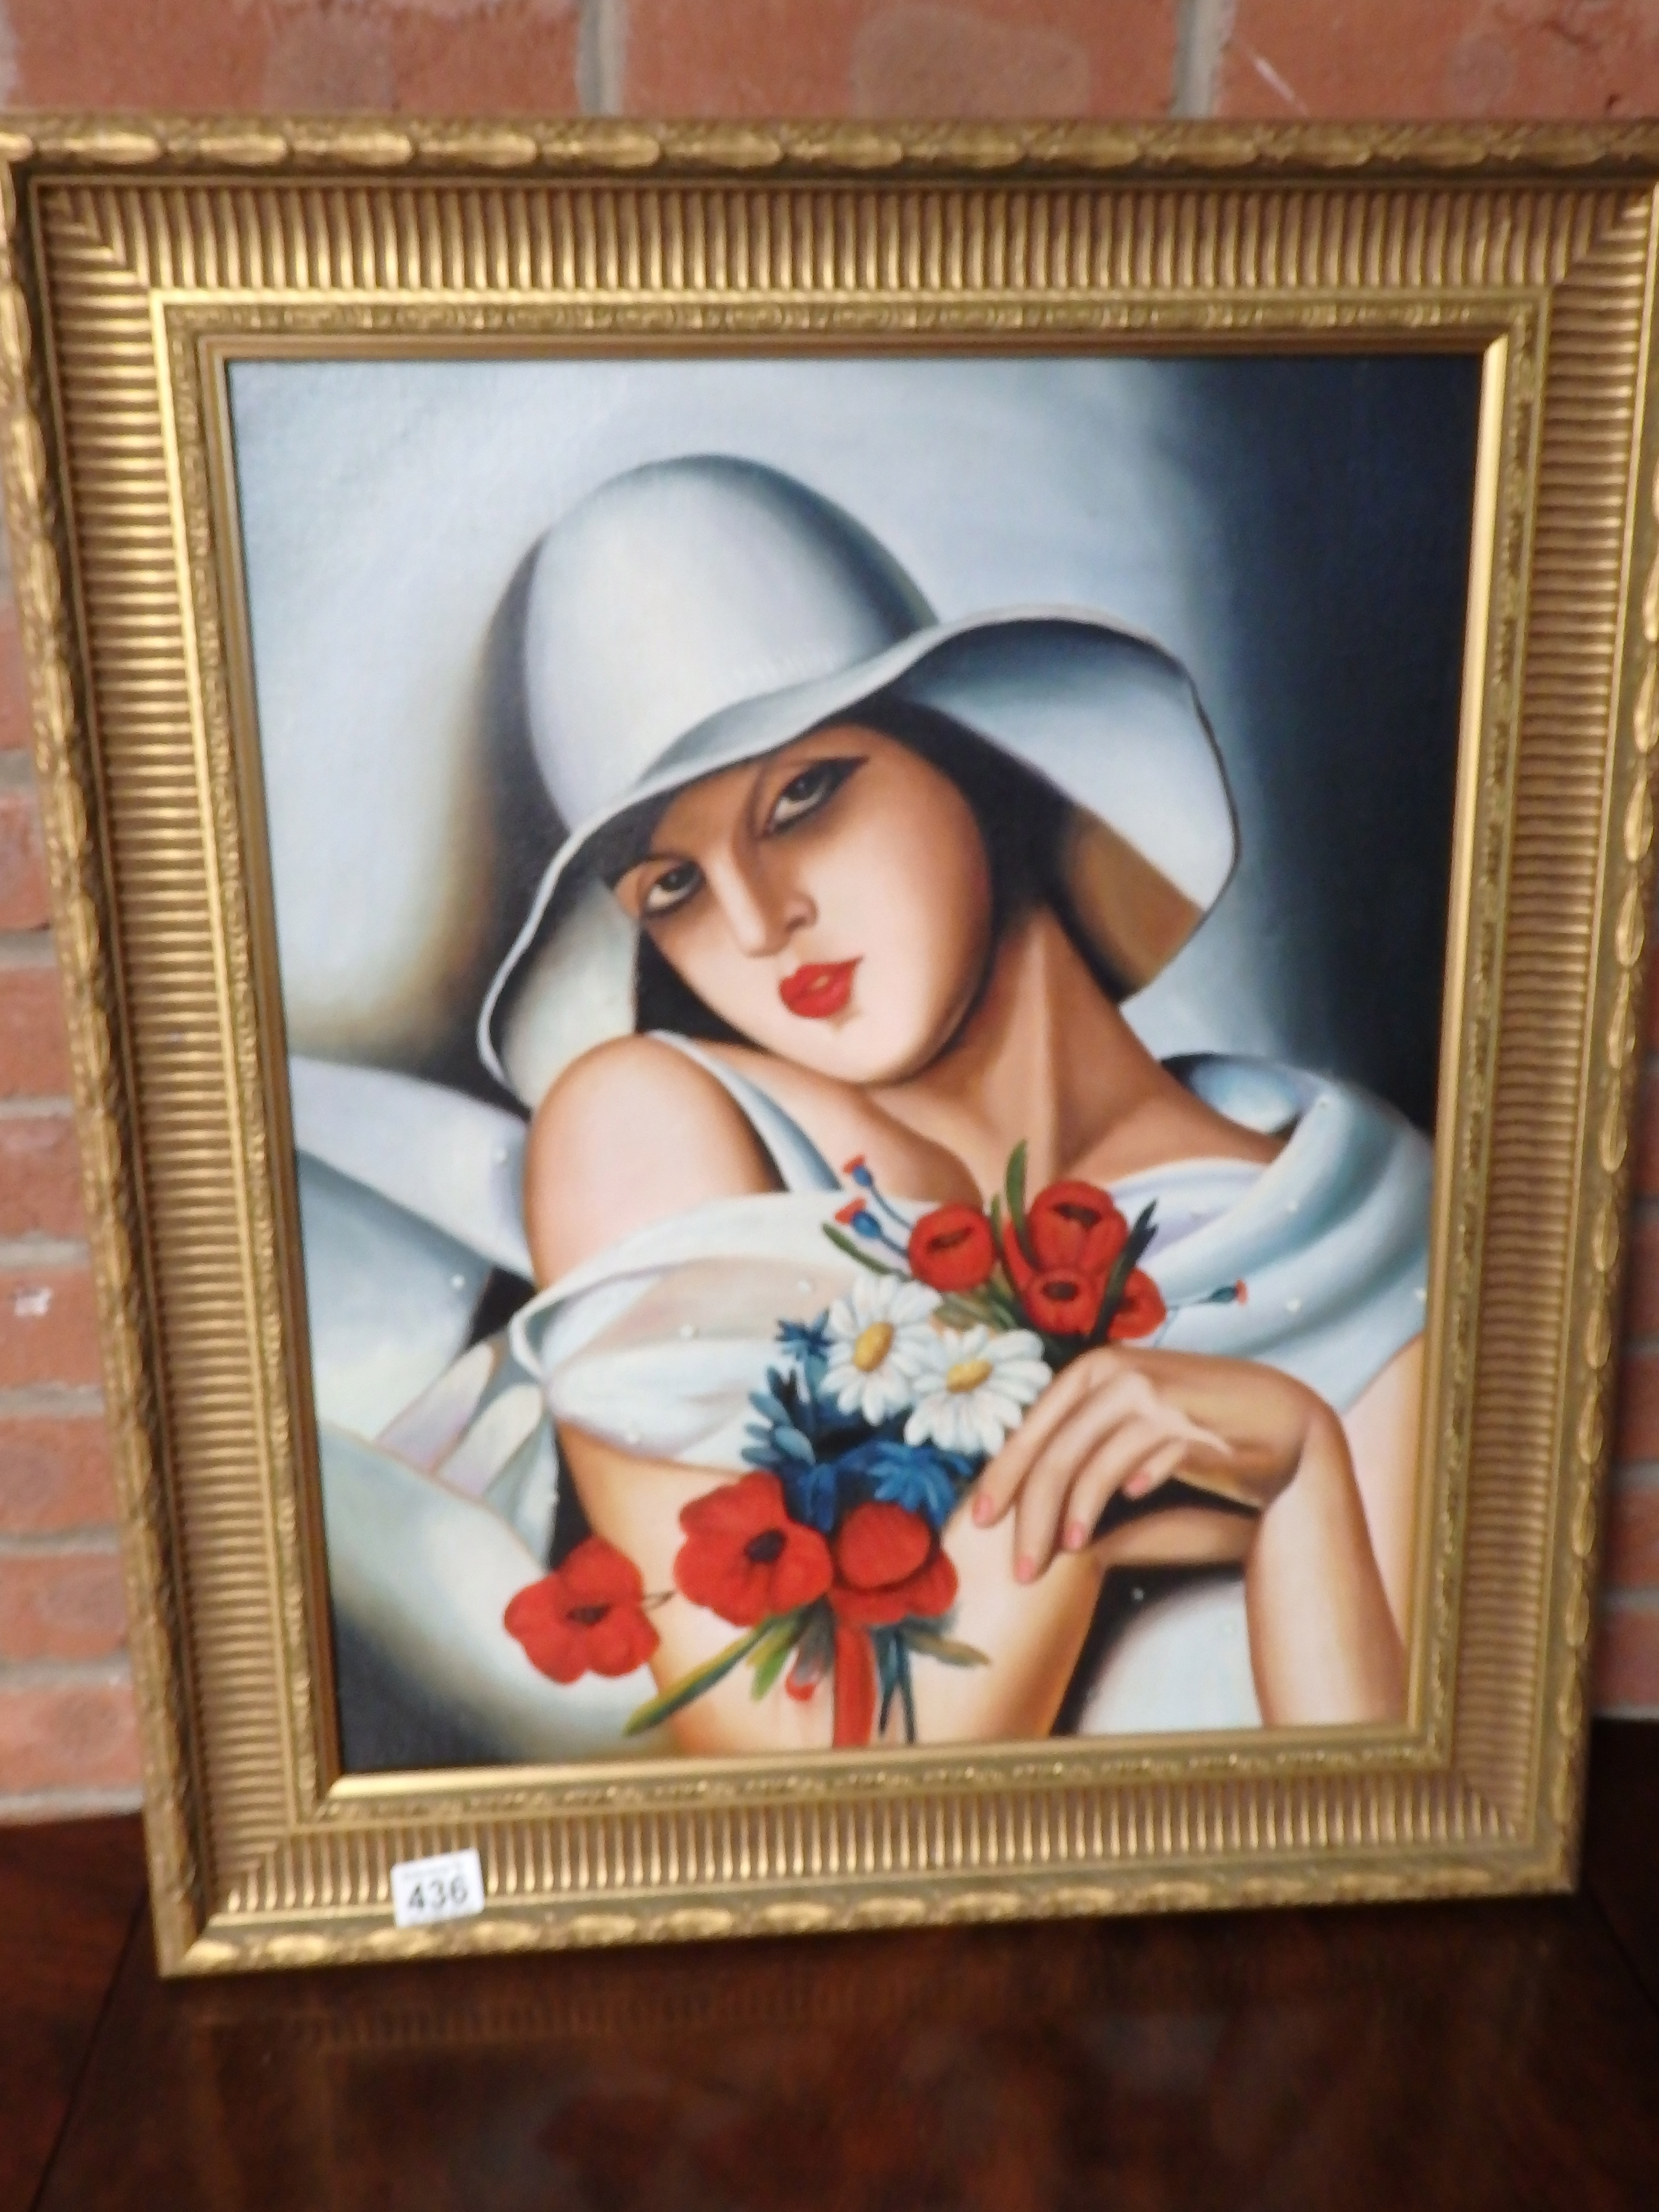 Art deco' style oil painting